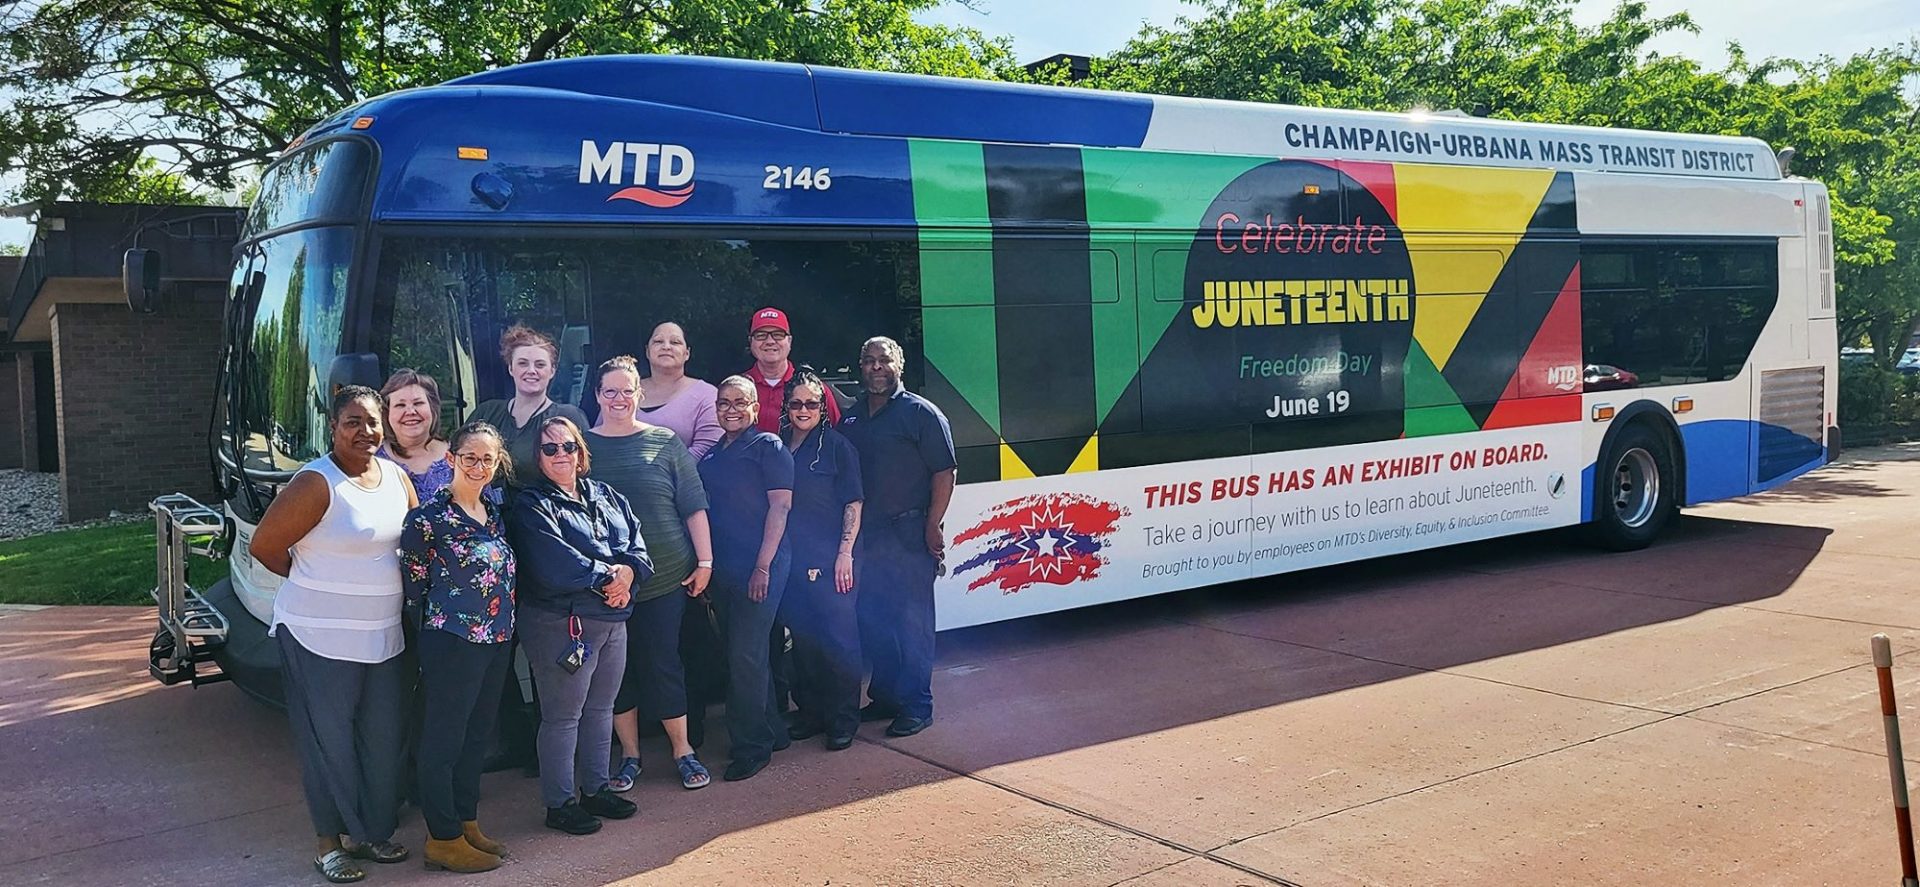 A group of people are standing in front of a city bus with the words Juneteenth in yellow, and accents of green, yellow, and red.